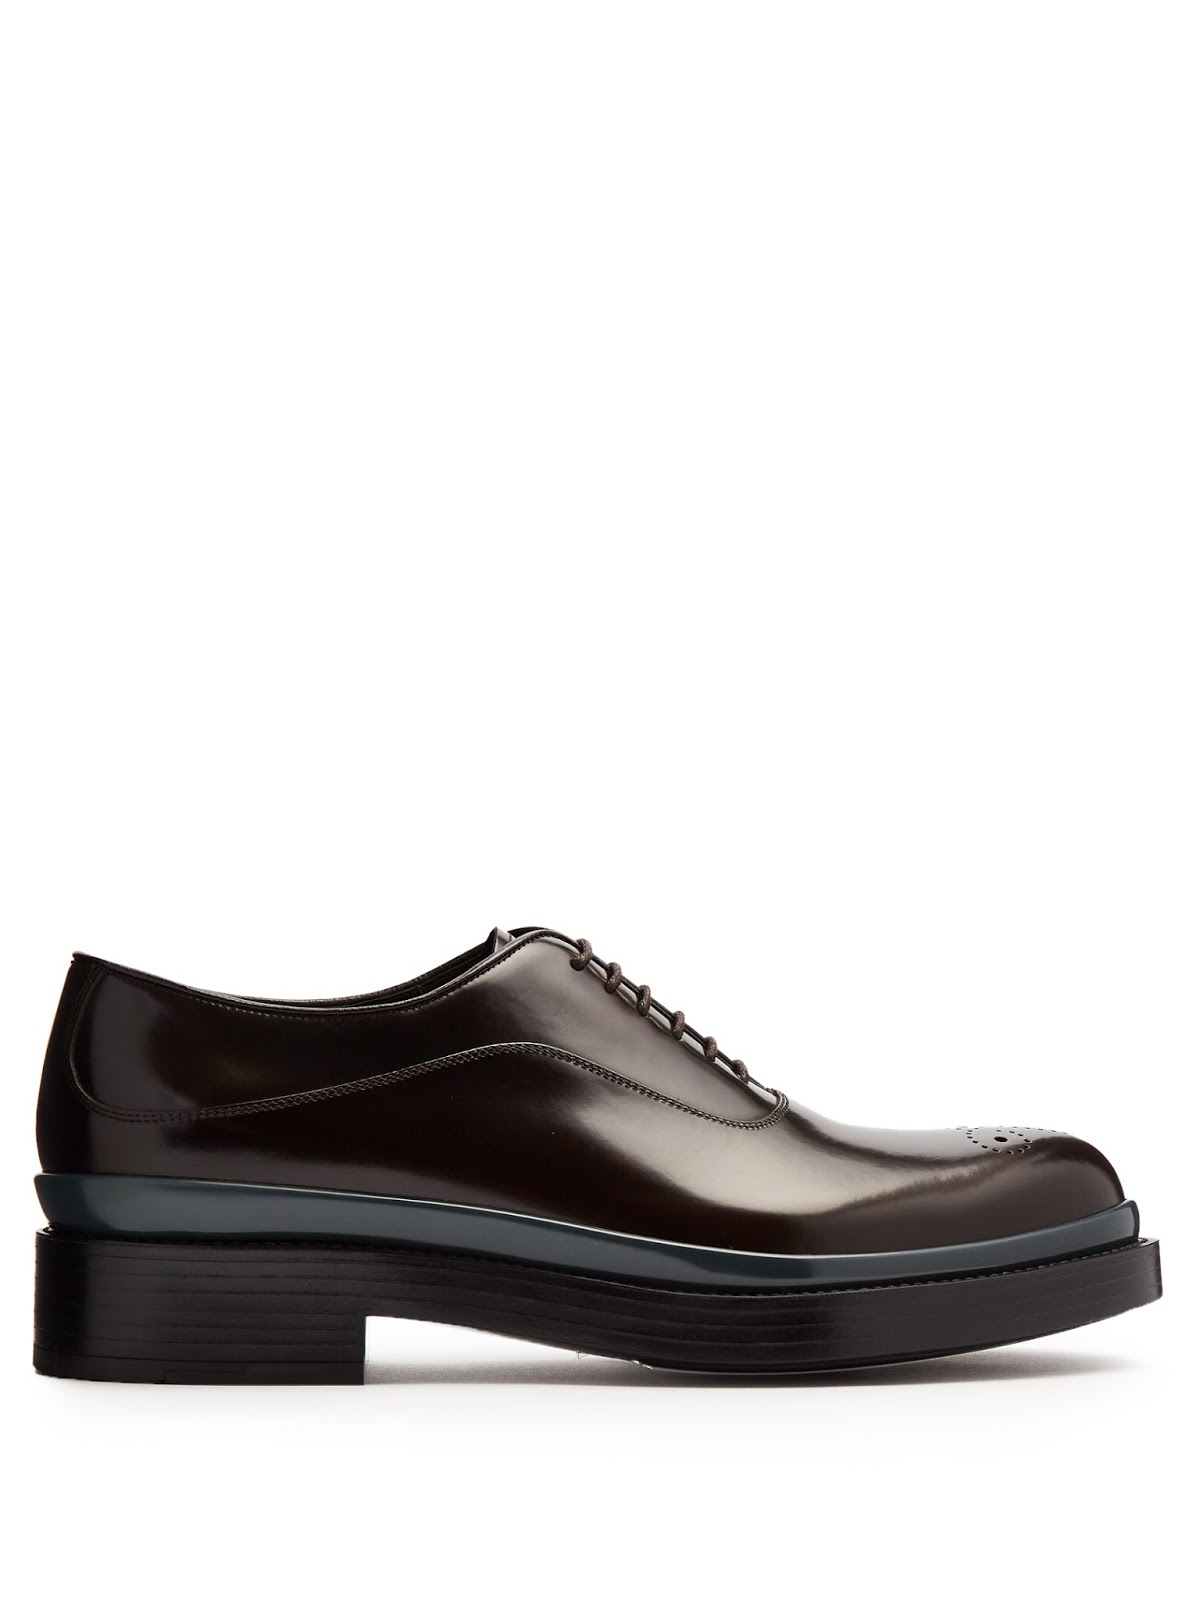 Stacked For Fall: Prada Raised-Sole Leather Oxford Shoes | SHOEOGRAPHY